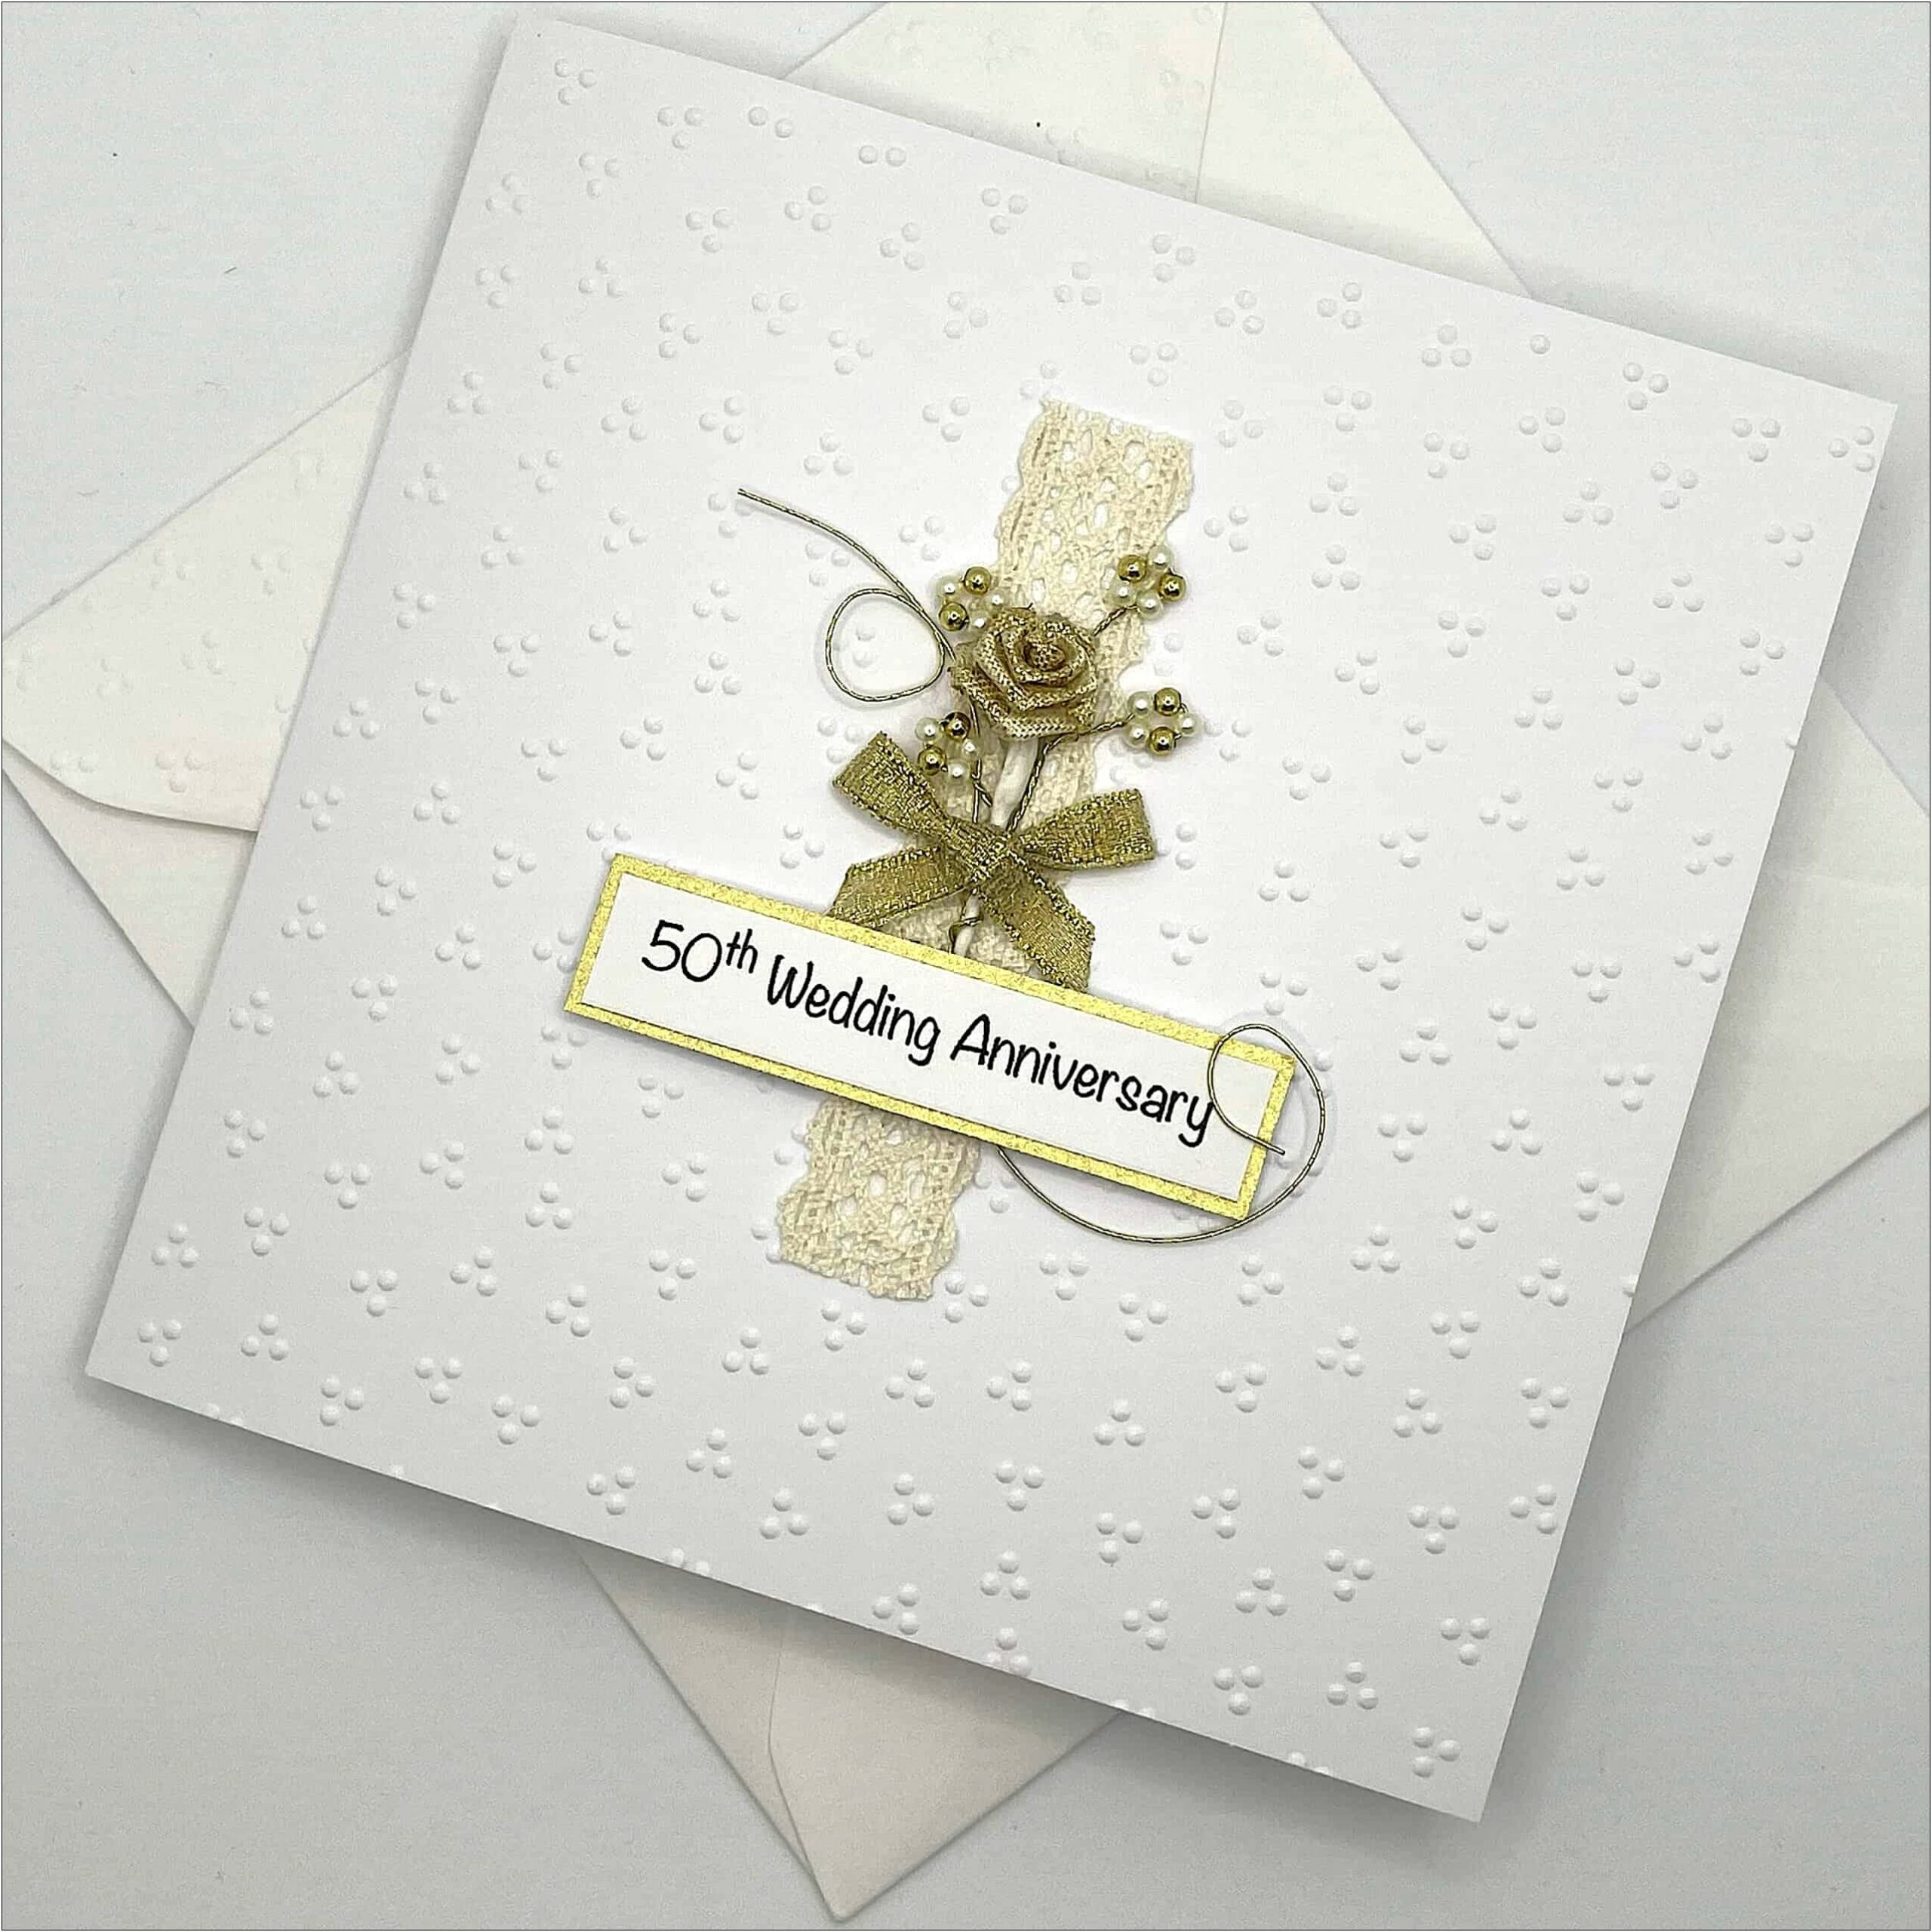 Free Invitation Cards For Golden Wedding Anniversary